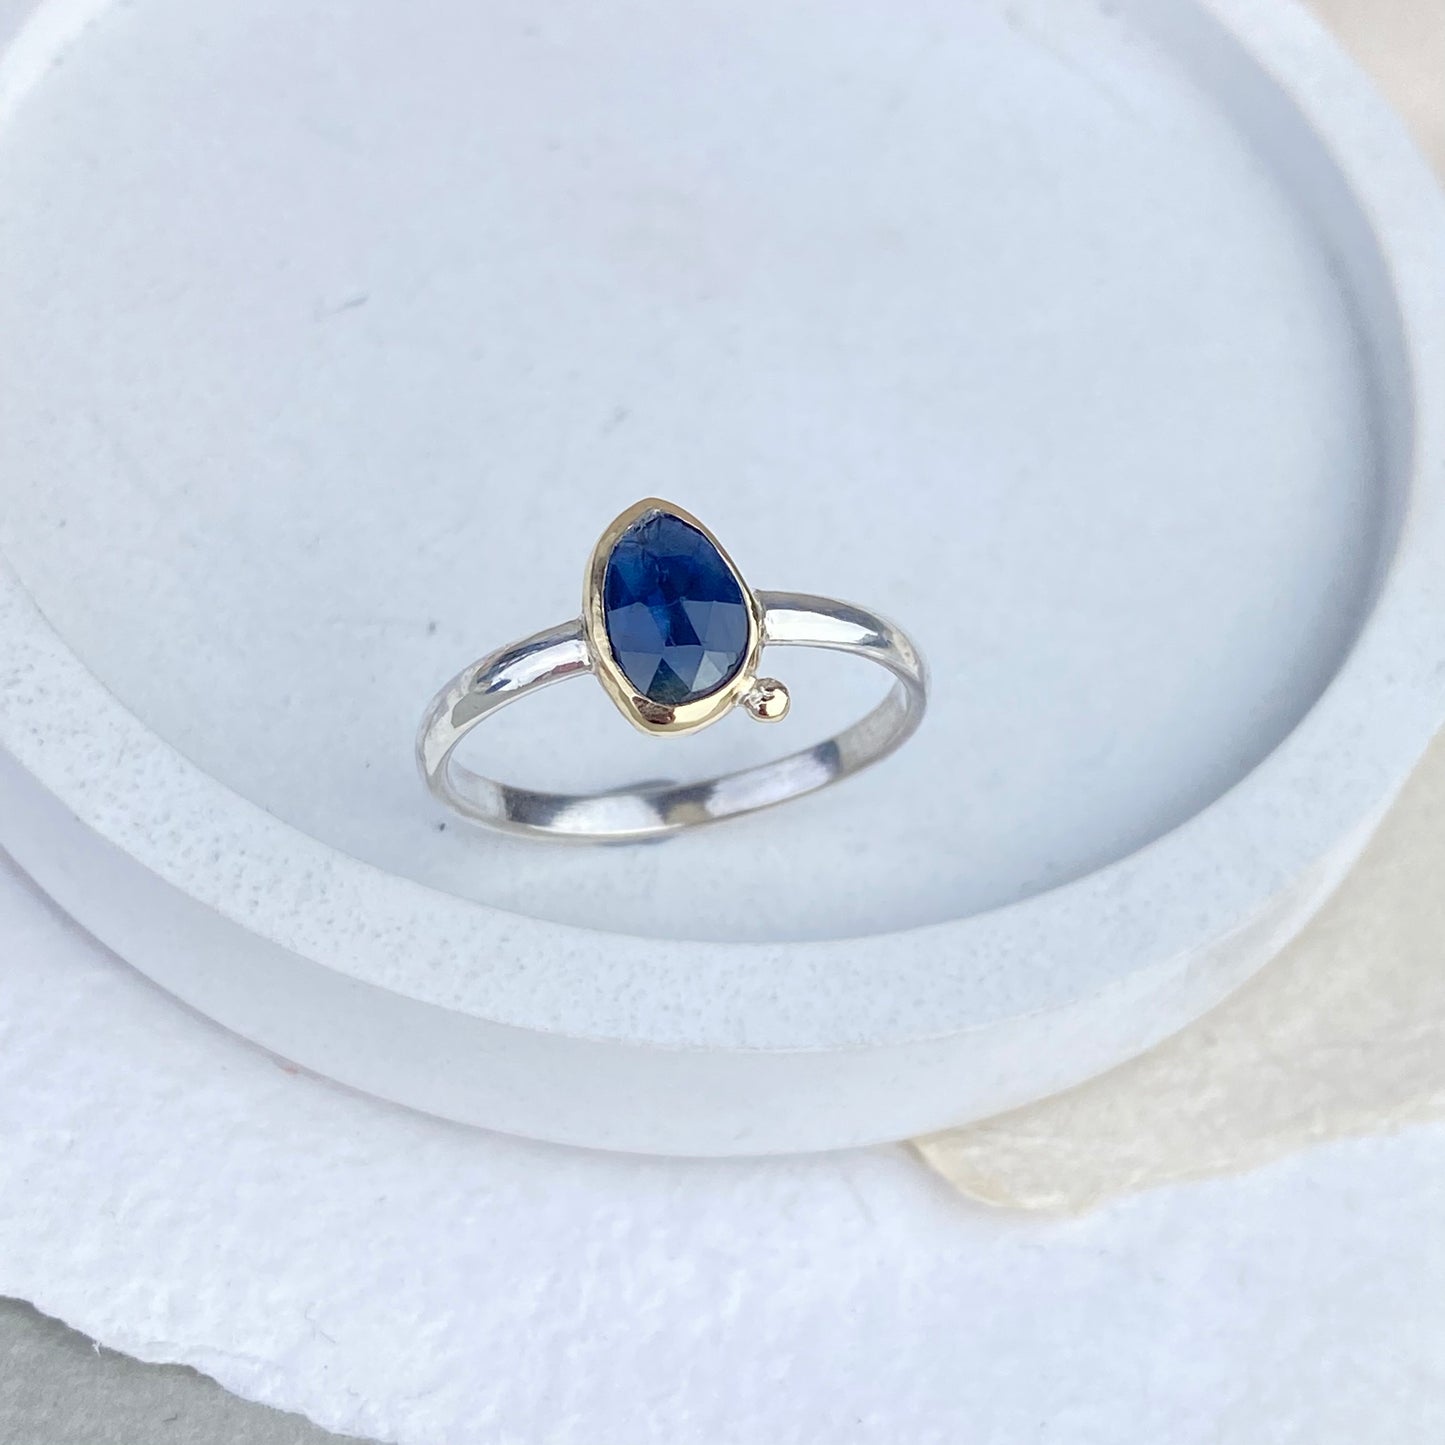 Sapphire ring in silver and gold